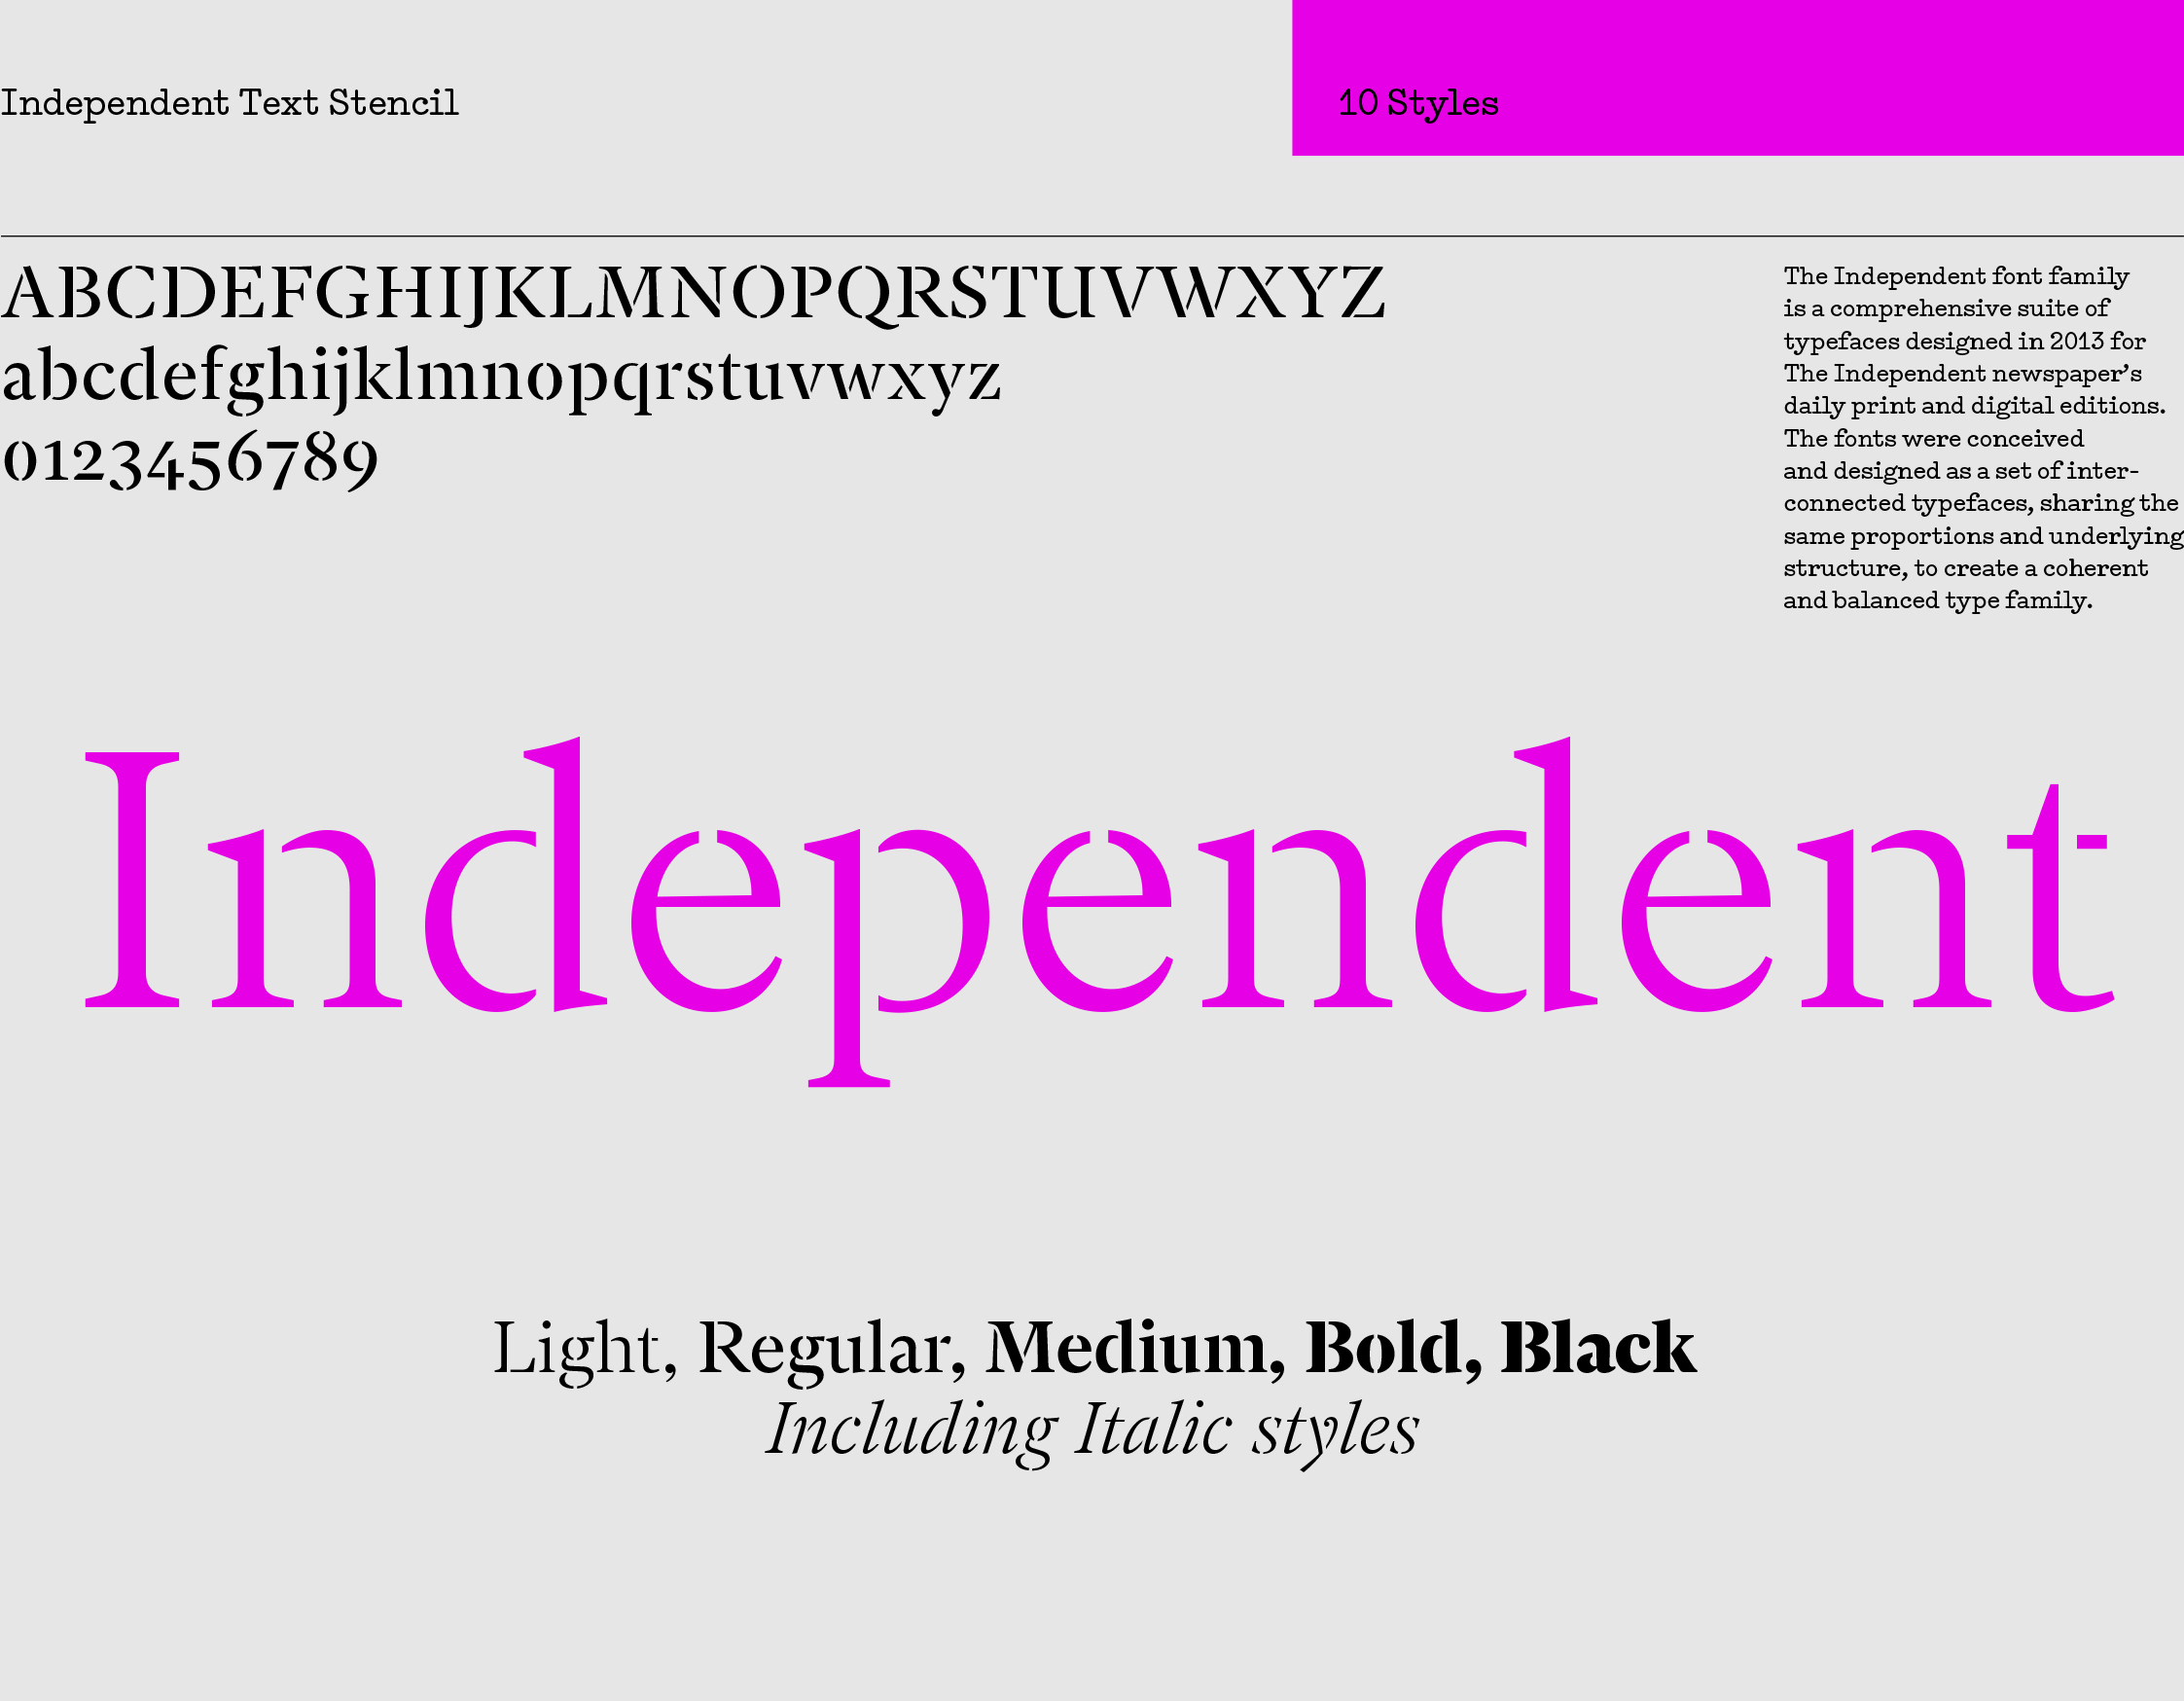 Independent Text Stencil sample